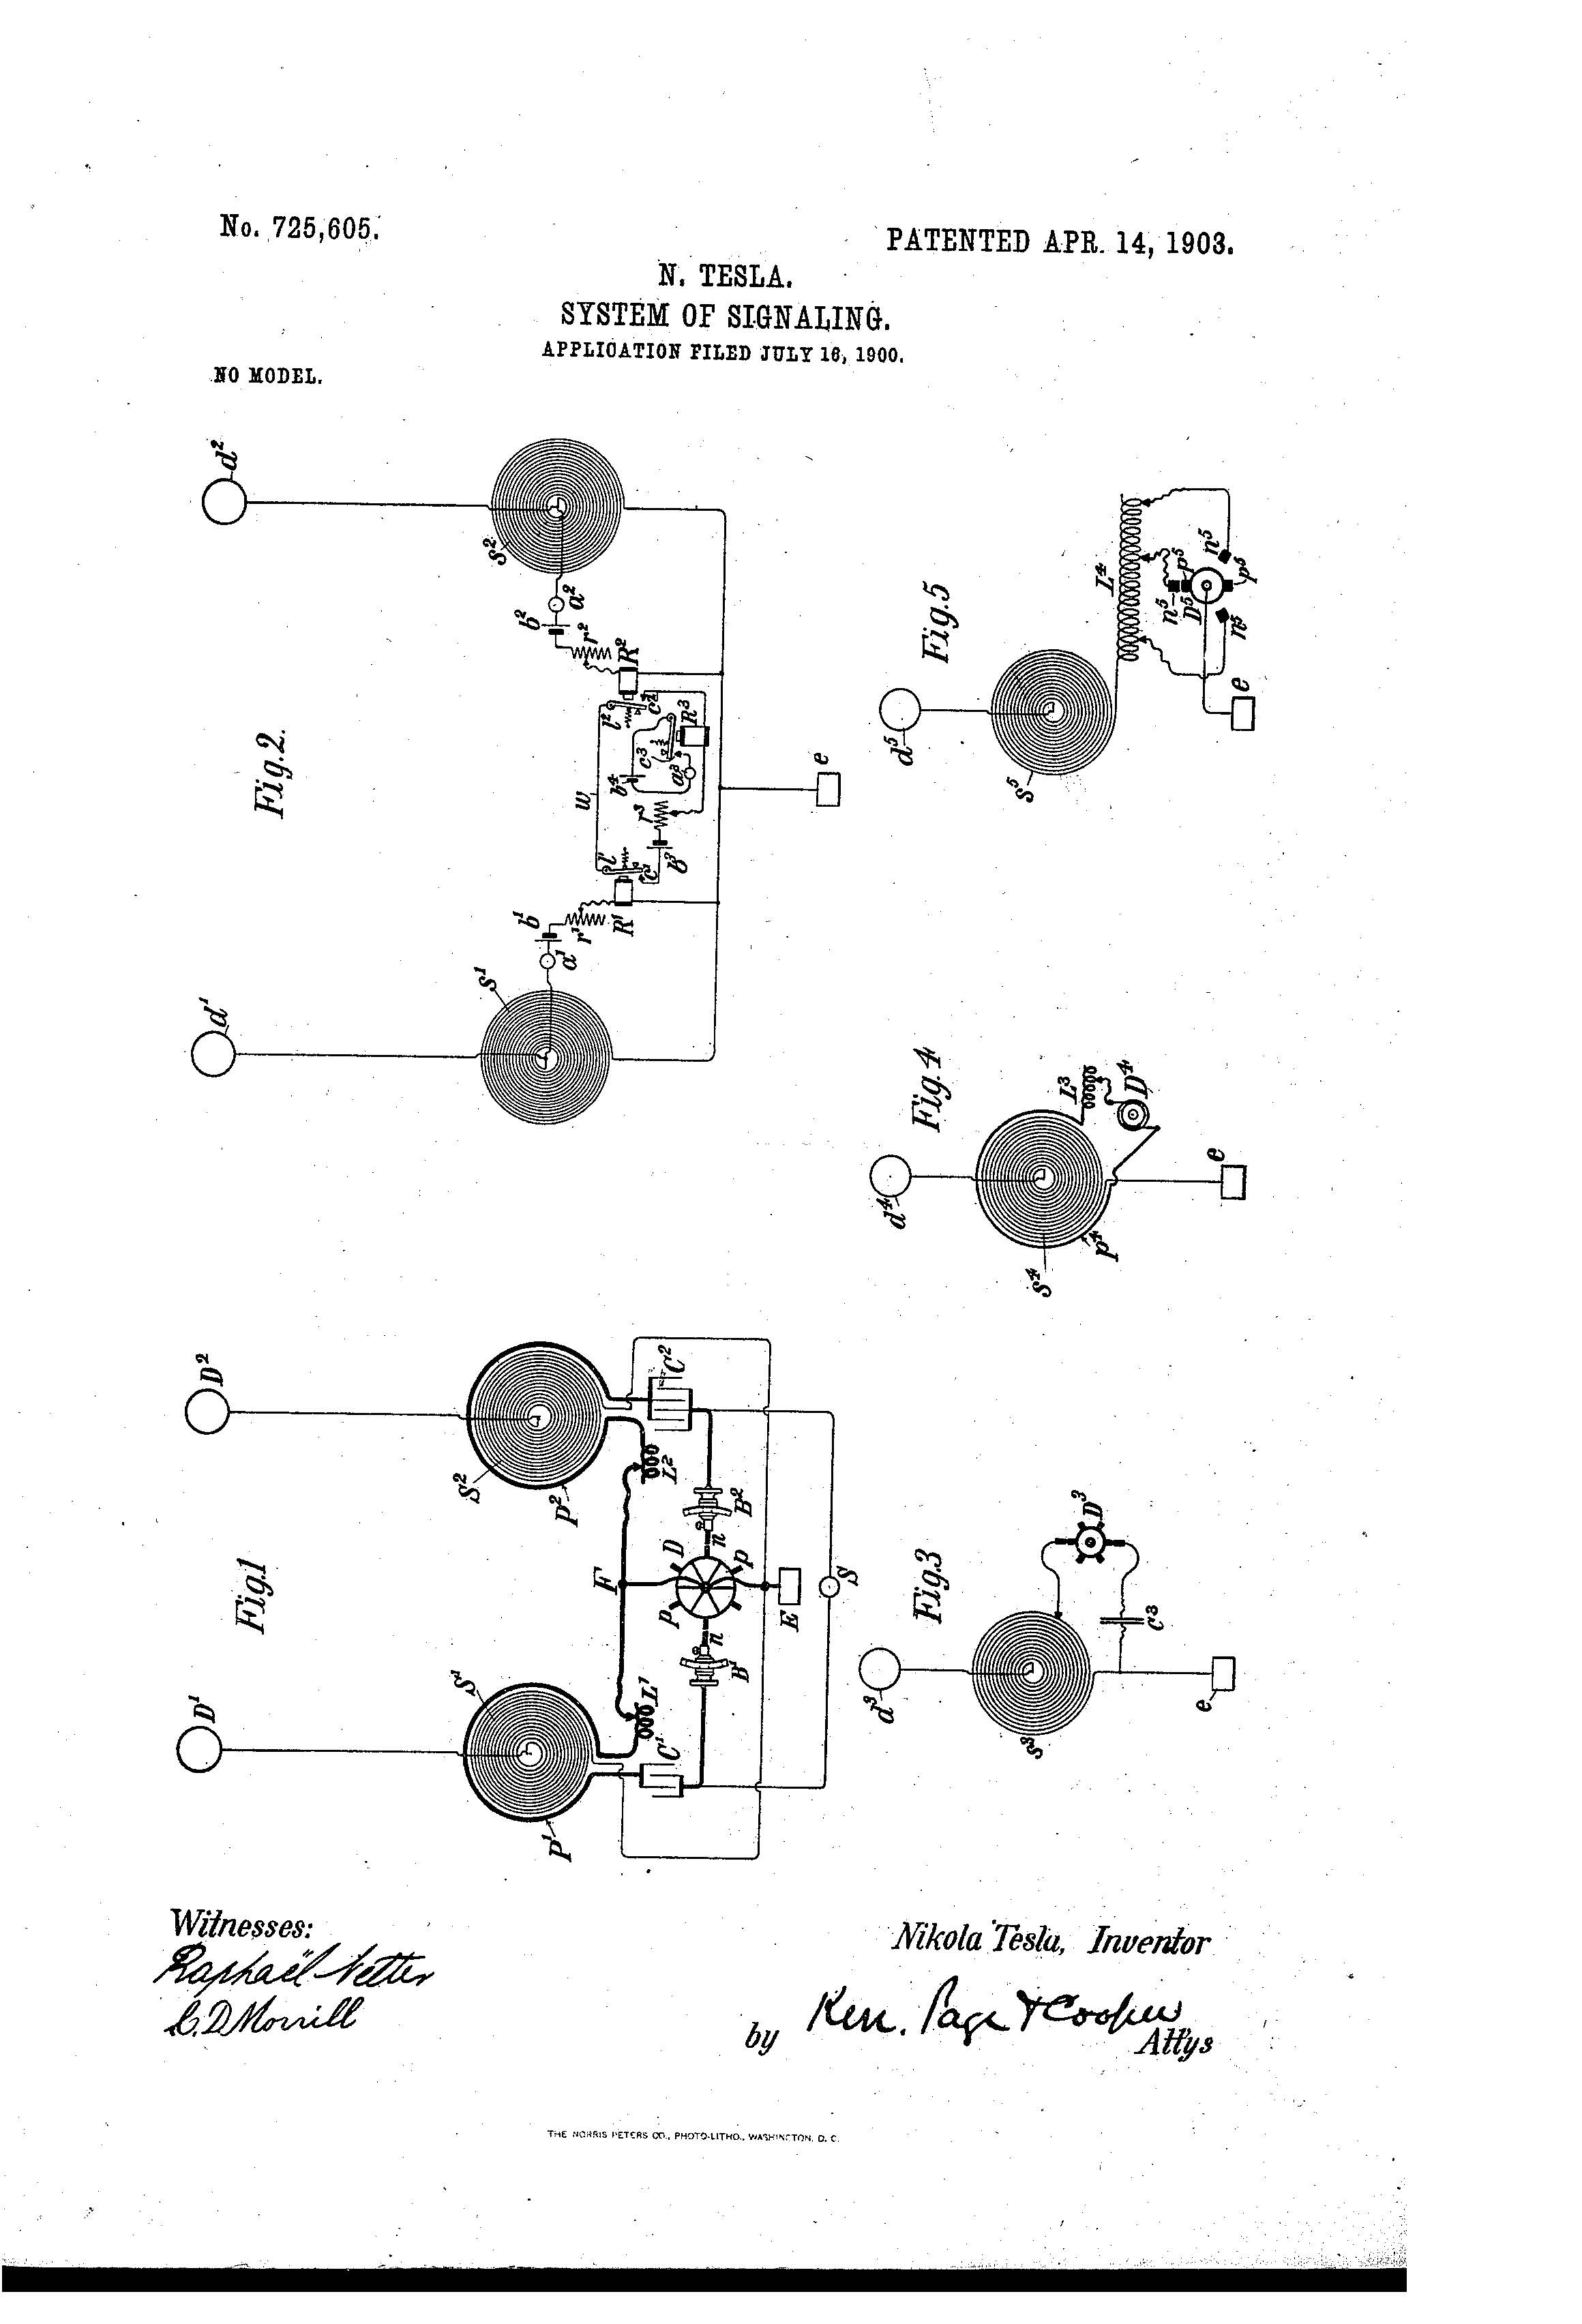 System of Signaling Patent